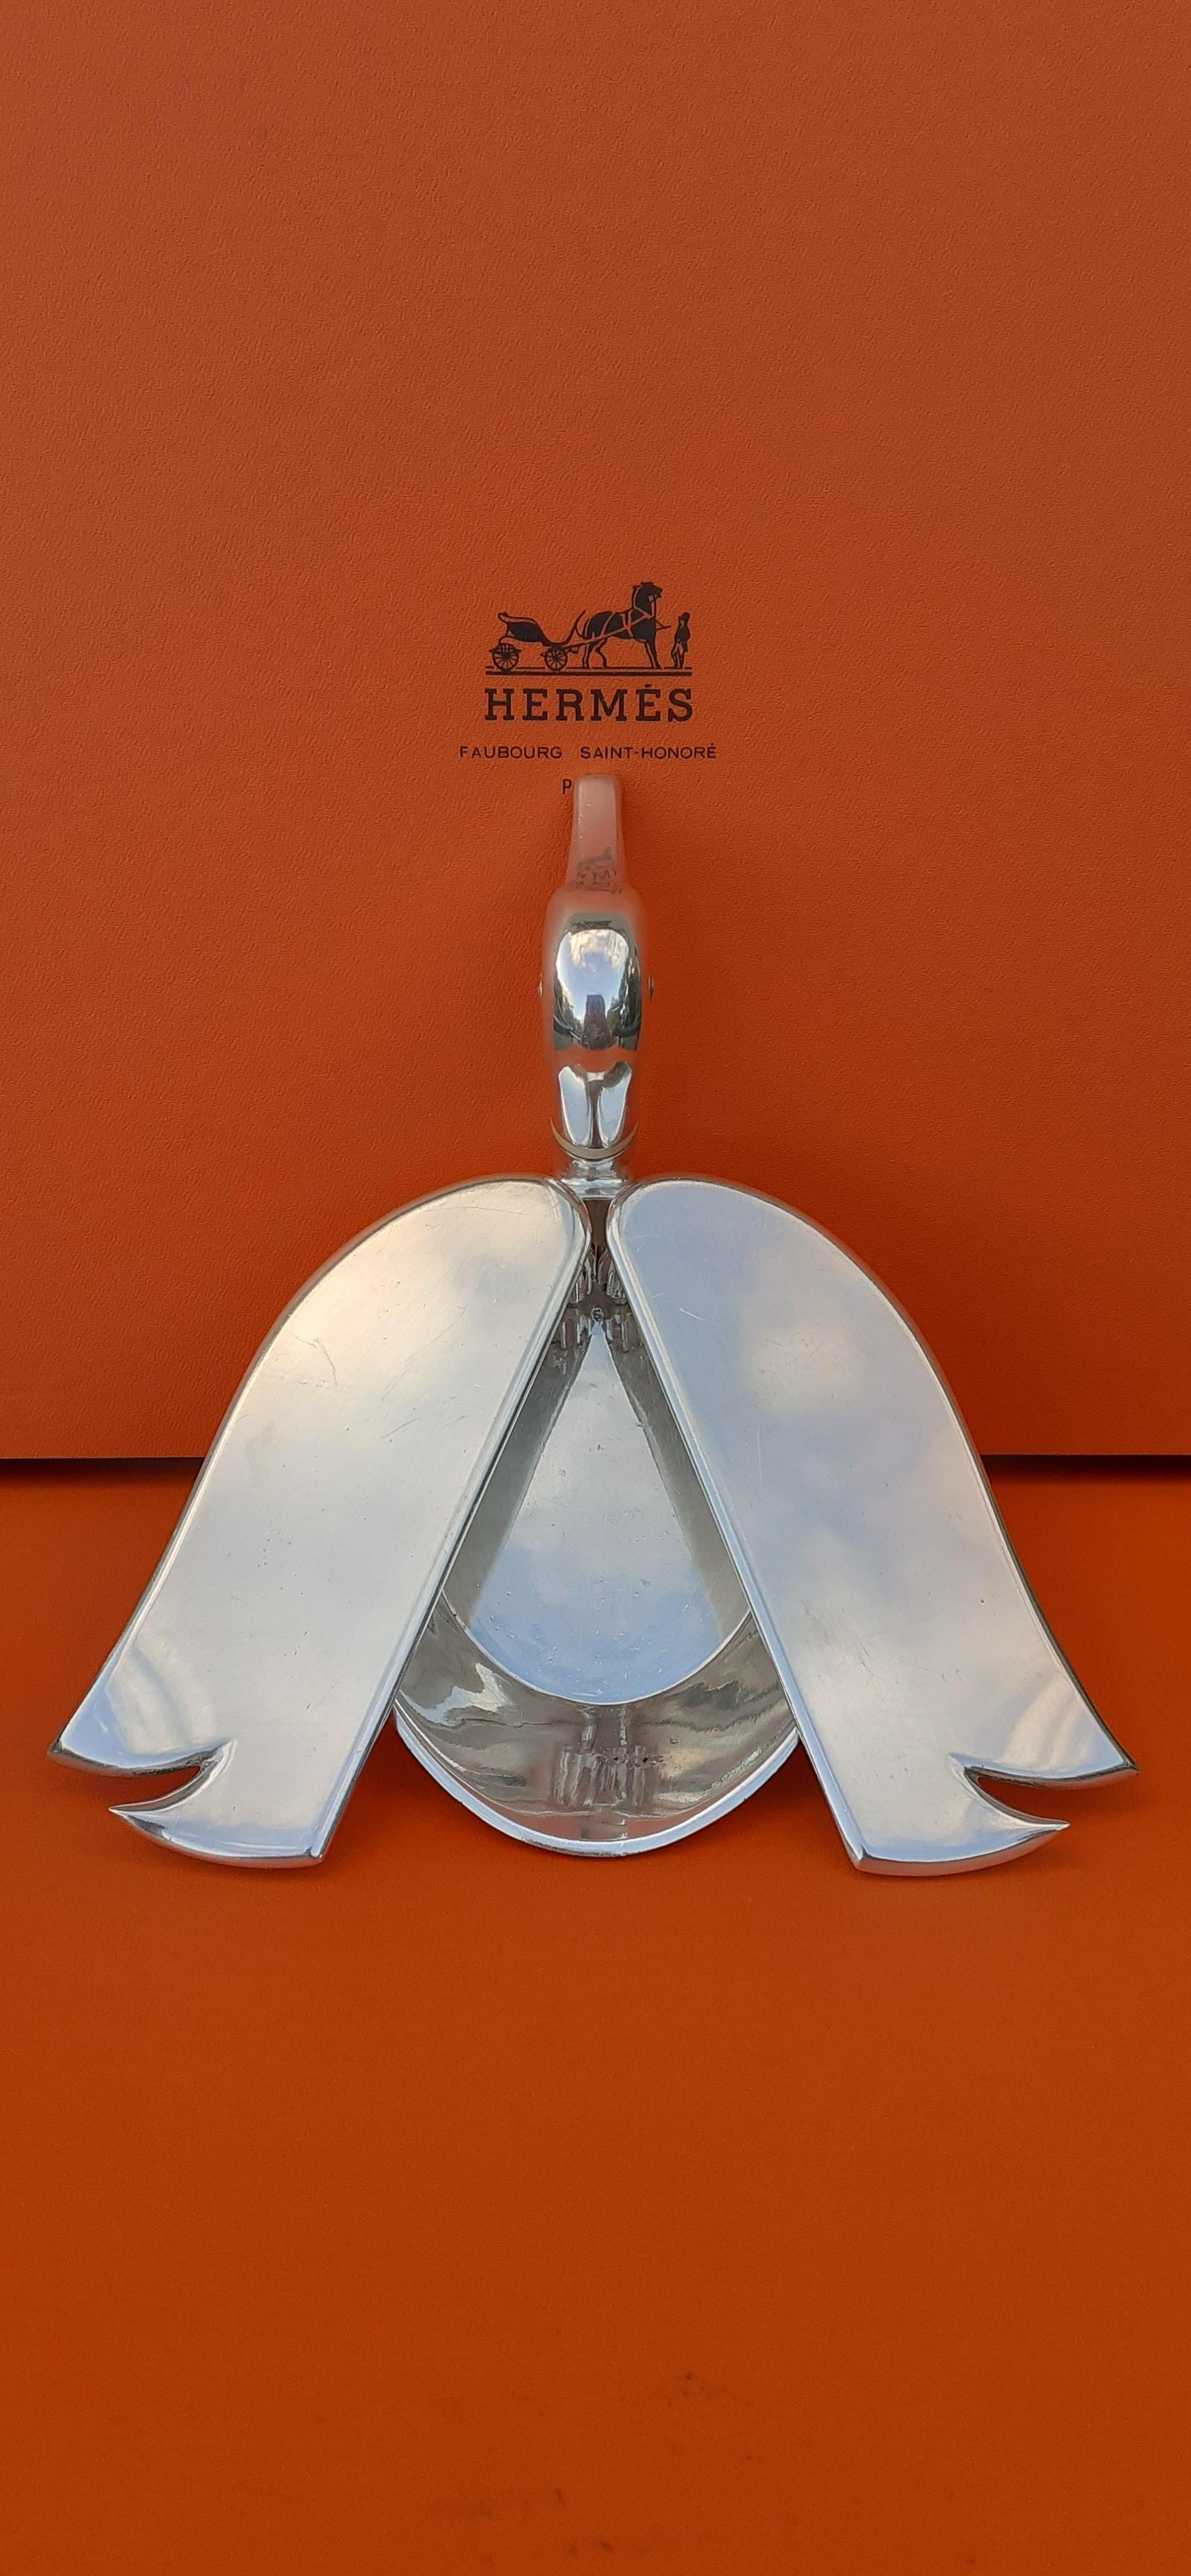 Exceptional Hermès Vintage Ashtray Change Tray Duck Shaped in Silver Tone Metal 6